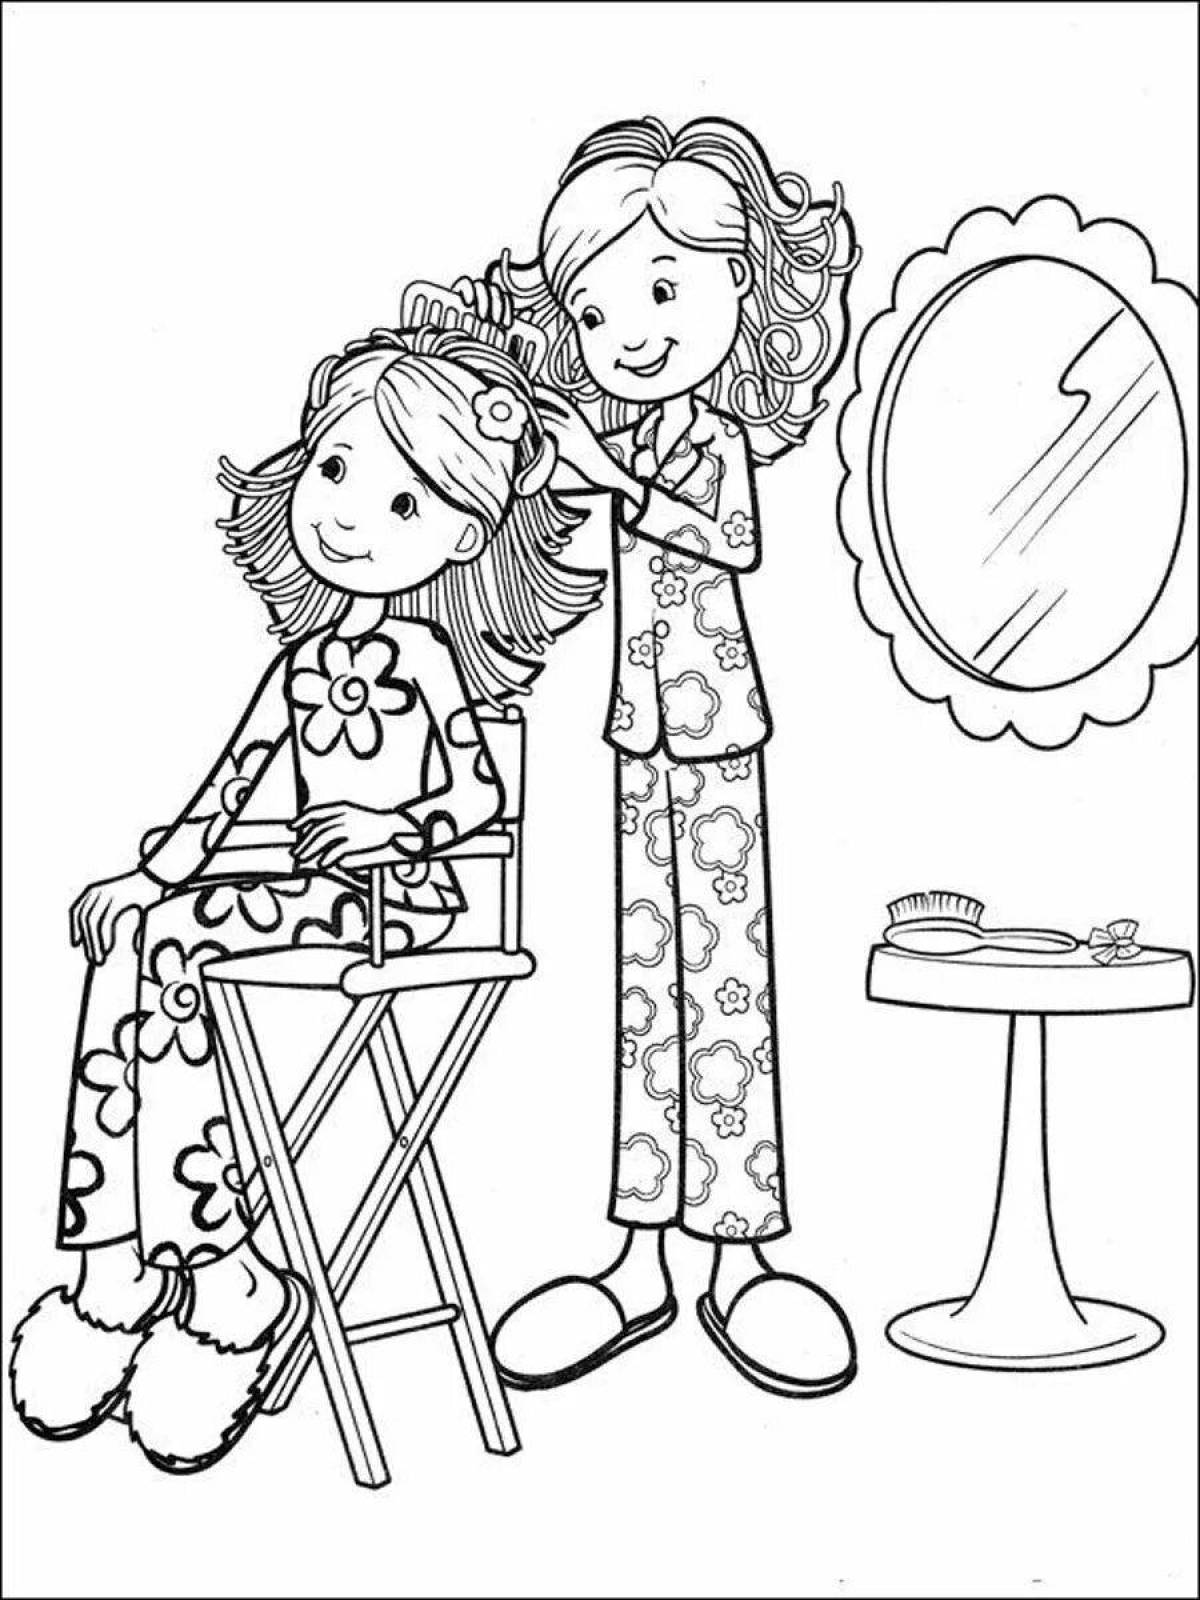 Fun hairdresser coloring for kids